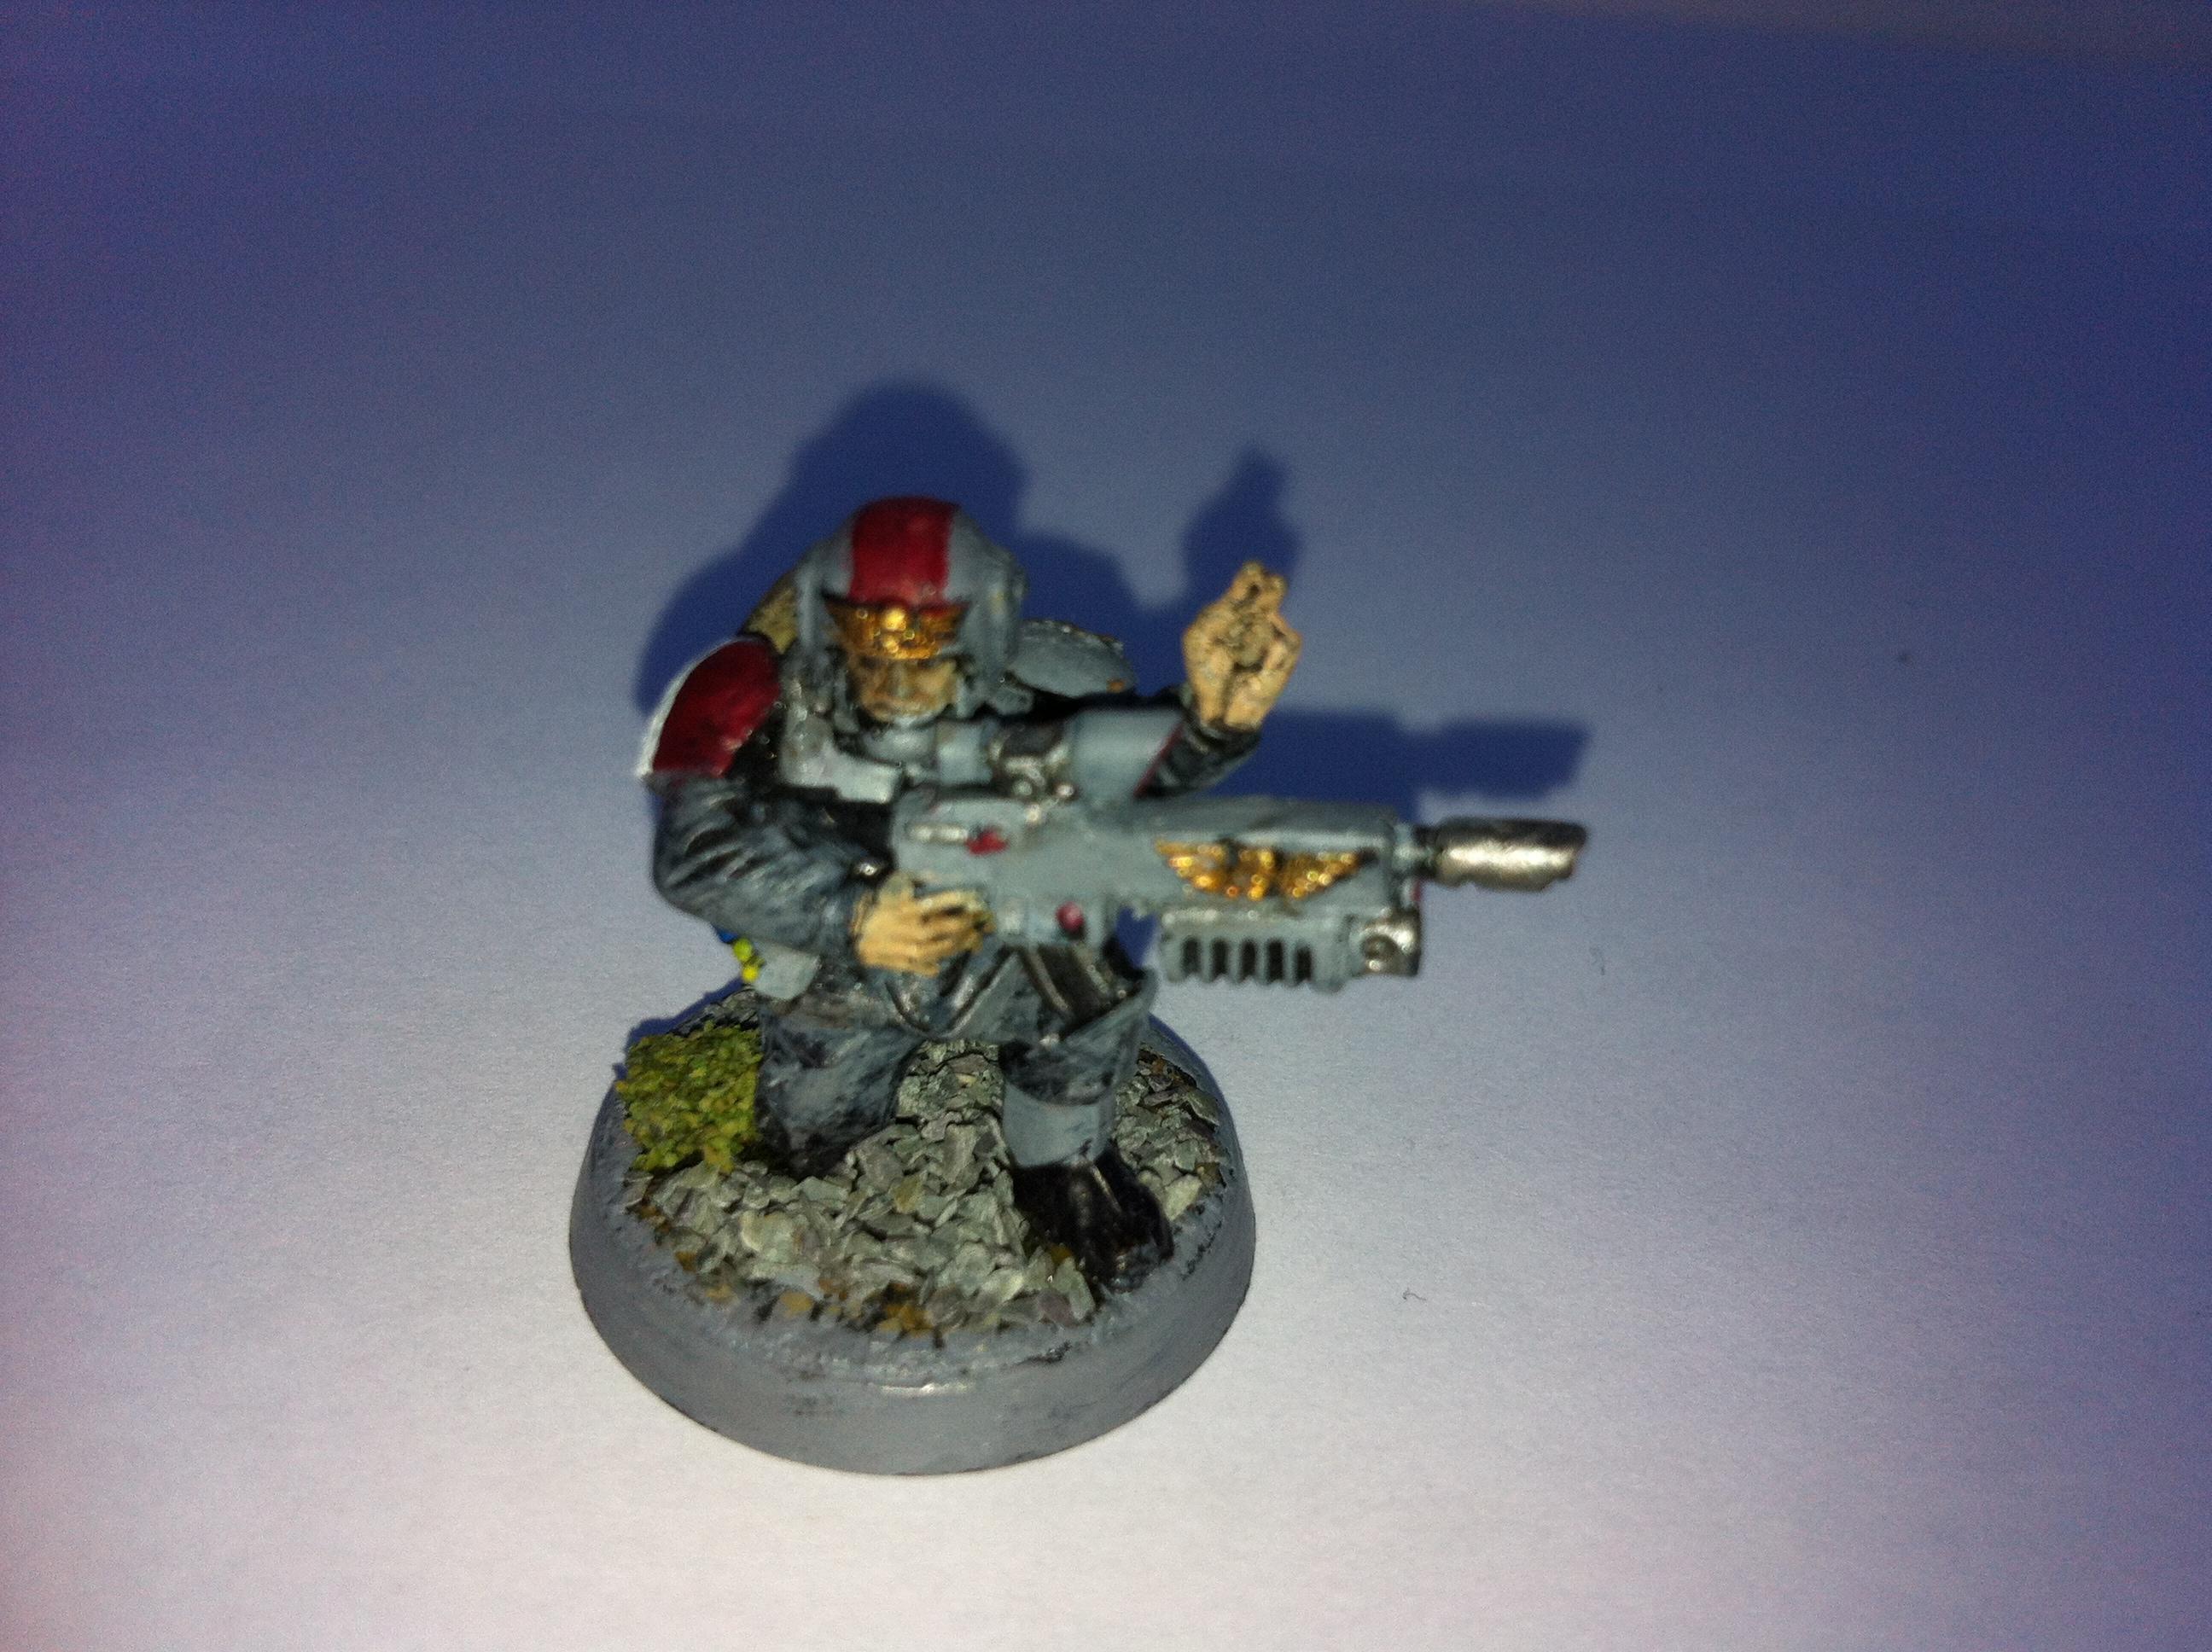 Cadian 57th, Captain, Imperial Guard, Imperial Guard Officer, Infantry